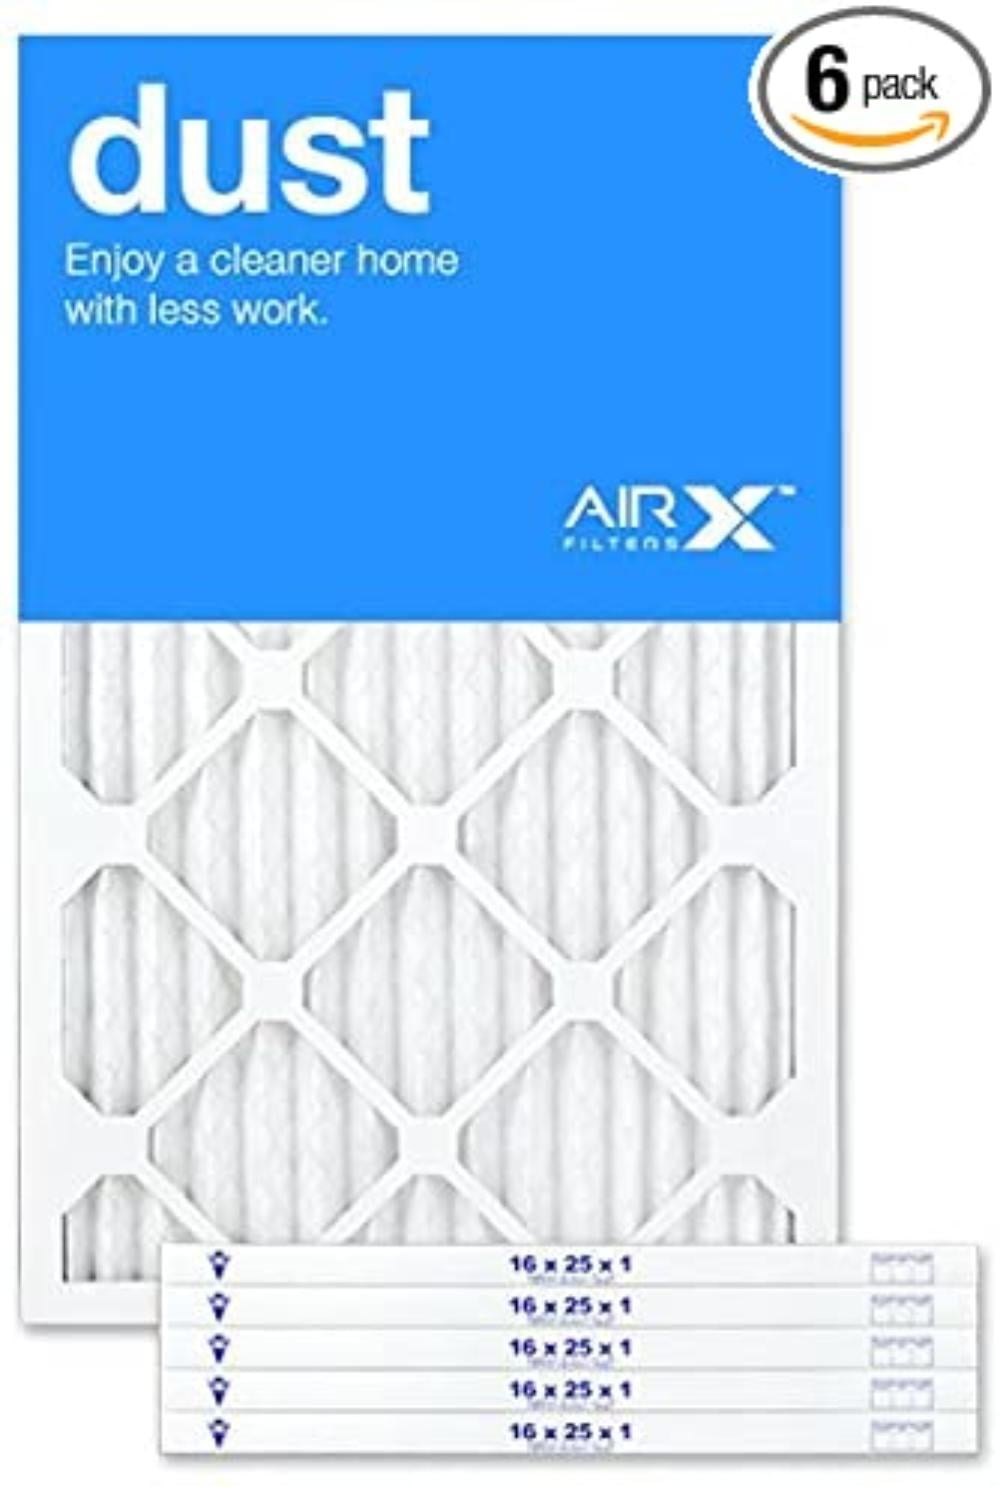 FPR 6 Air Filter 3-Pck Nordic Pure 16 x 25 x 2 Dust Reduction Pleated MERV 8